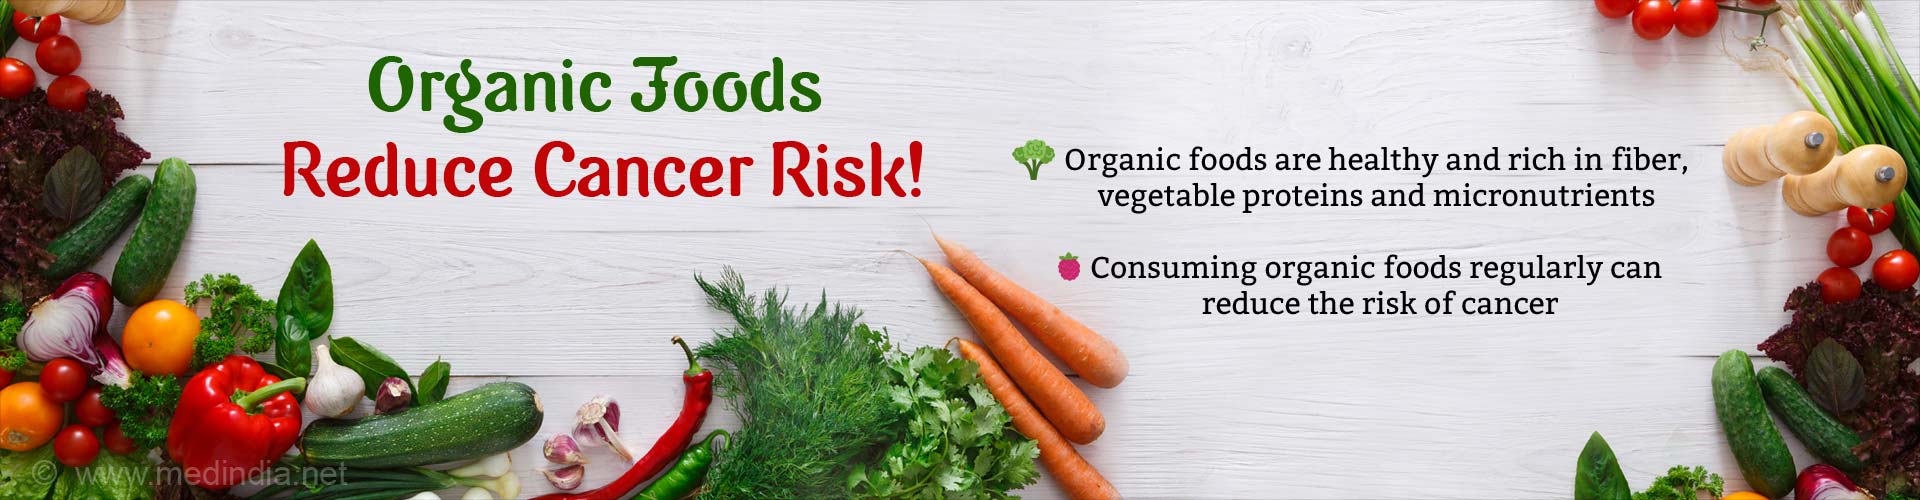 Organic foods reduce cancer risk! Organic foods are healthy and rich in fiber, vegetable proteins and micronutrients. Consuming organic foods regularly can reduce the risk of cancer.